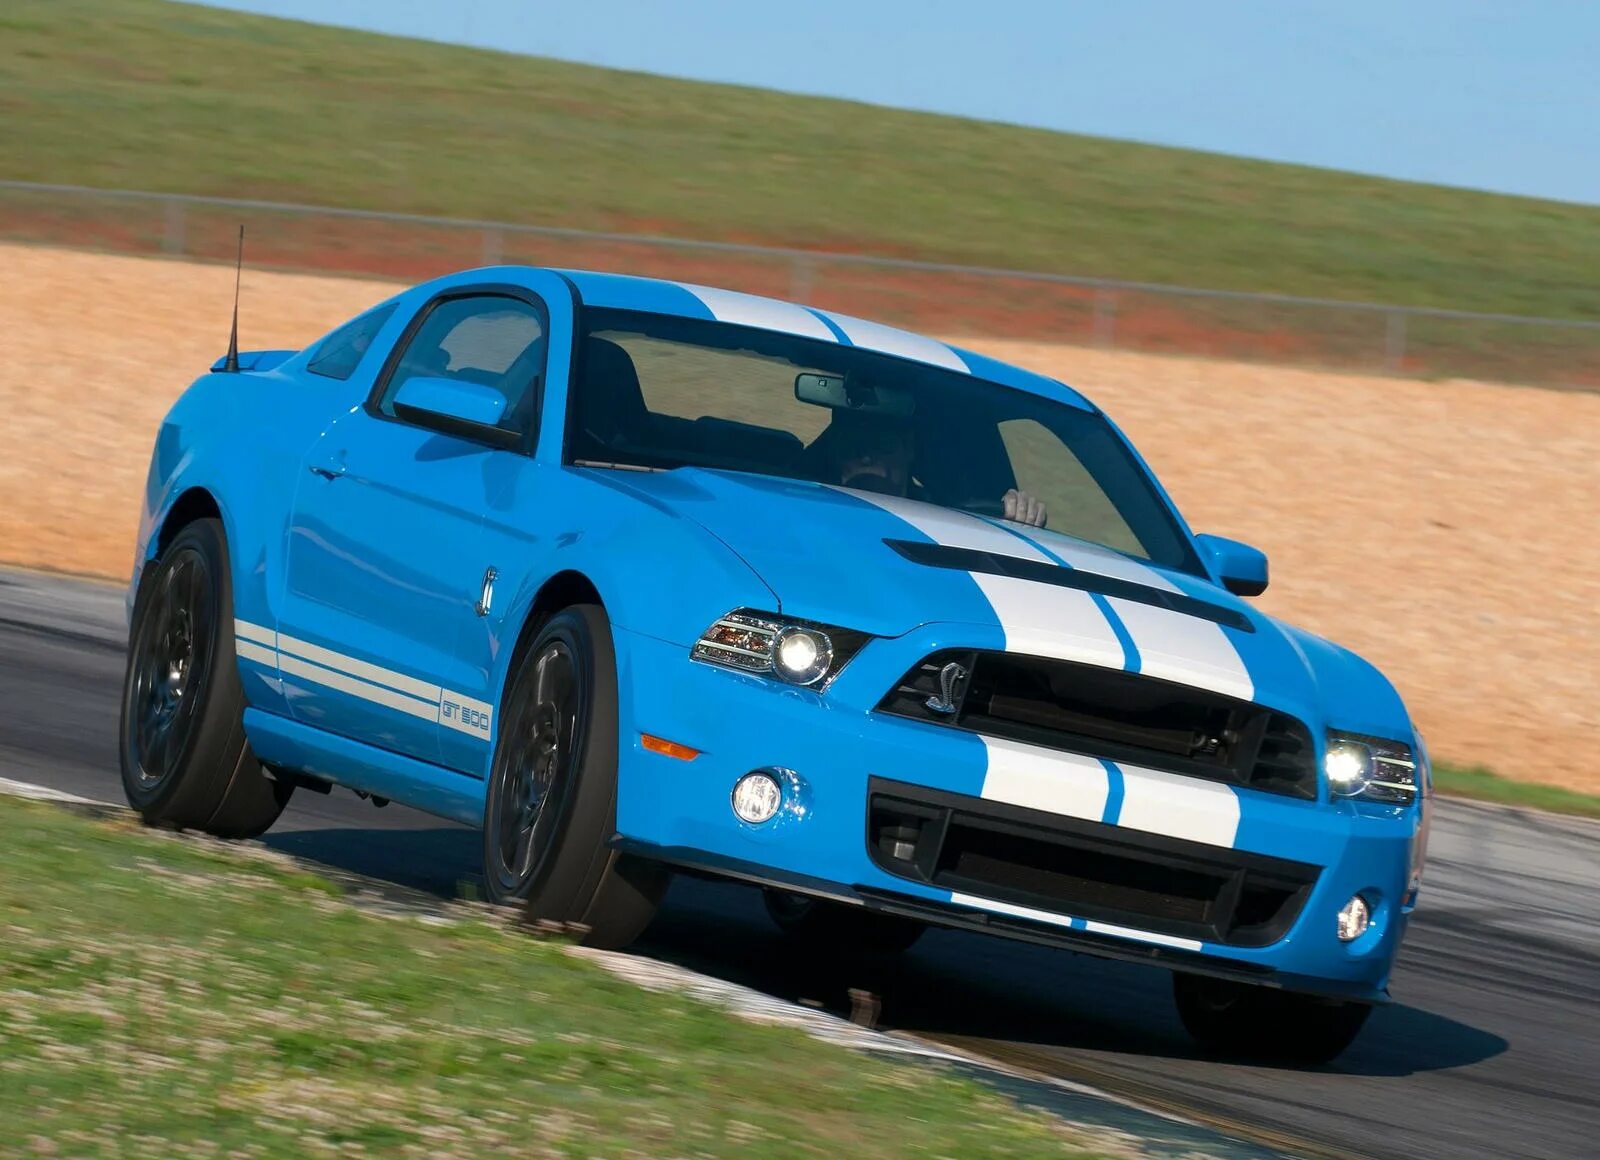 Форд Мустанг gt 500. Ford Mustang Shelby gt500 SVT 2012. Форд Мустанг Шелби Джи ти 500. Форд Мустанг Шелби gt 2012. Mustang shelby gt